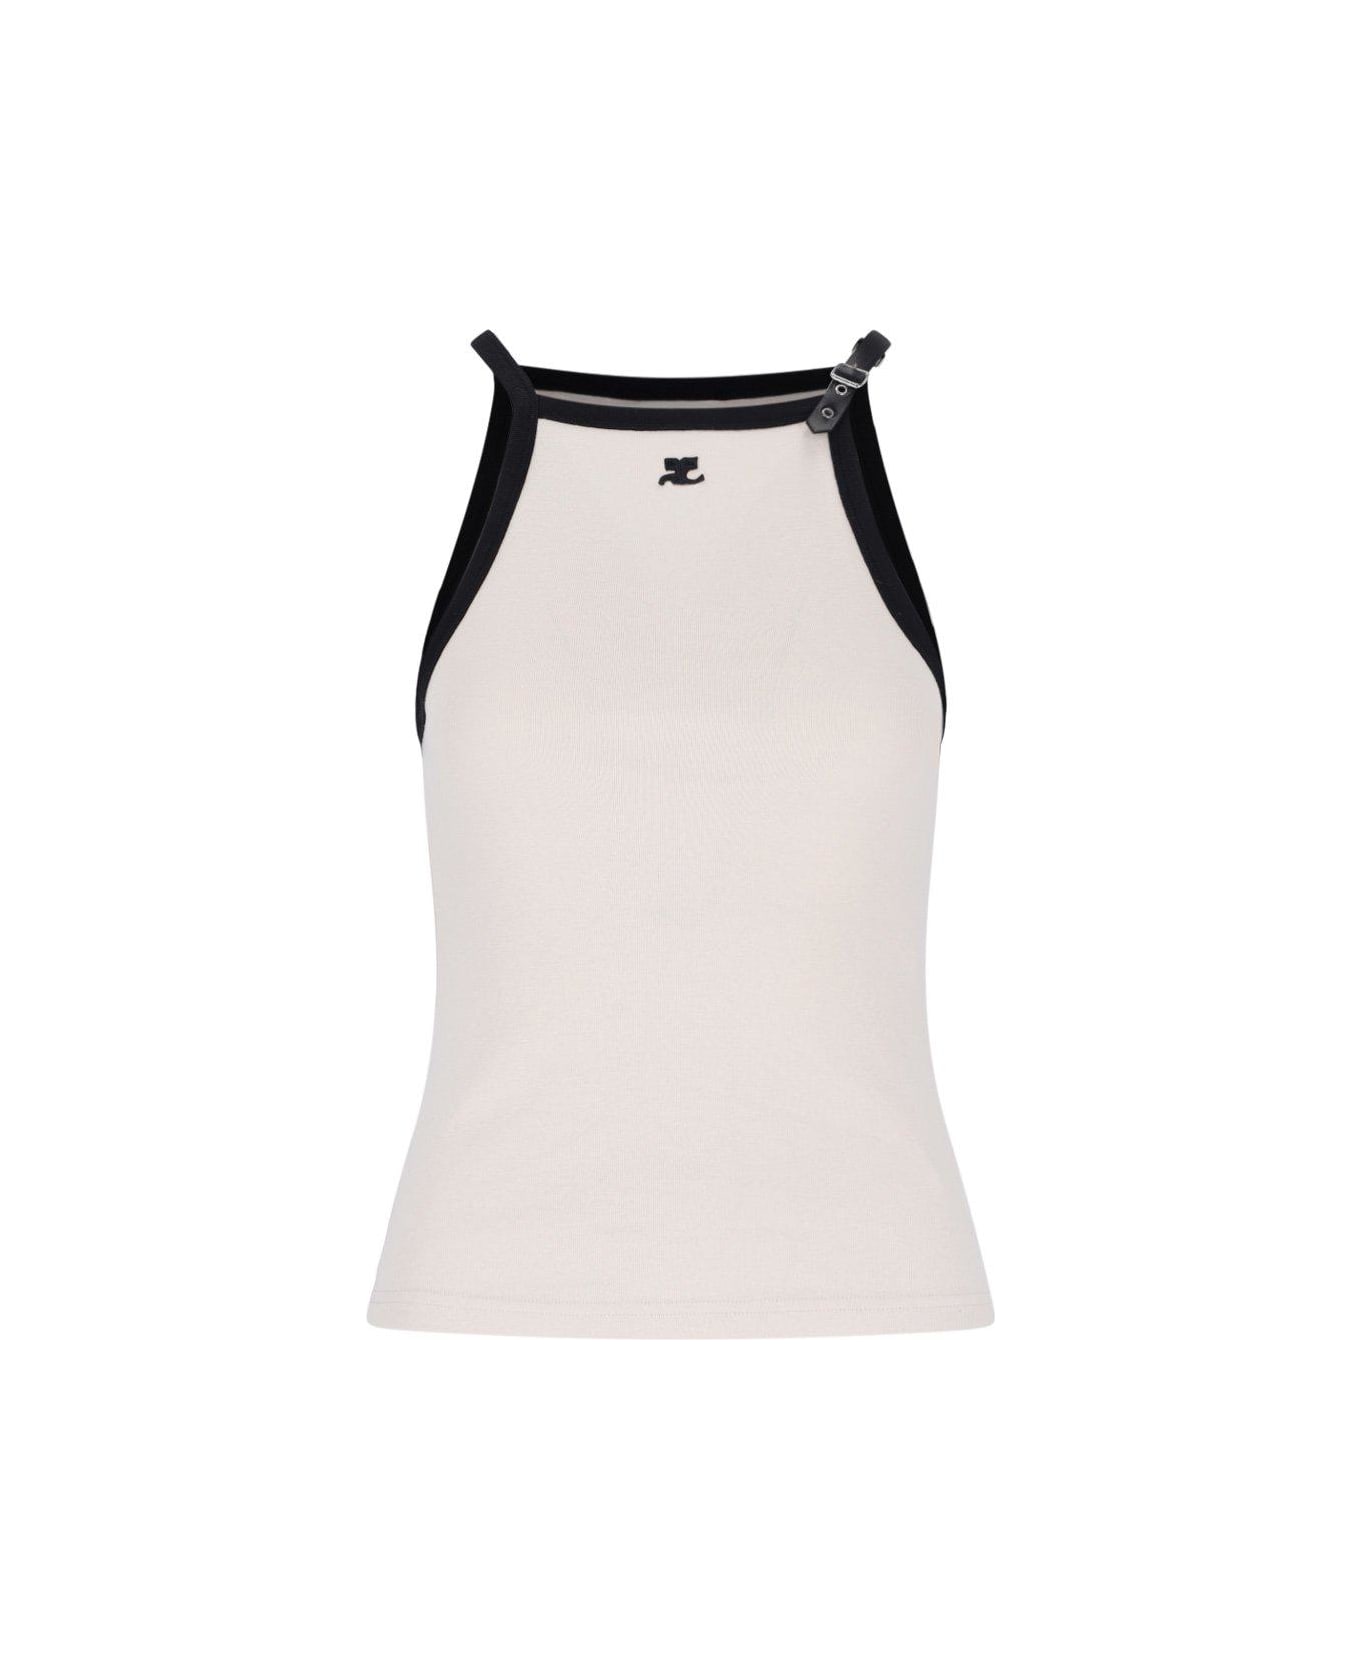 Courrèges Buckle Contrast Tank Top - LIME STONE / BLACK タンクトップ